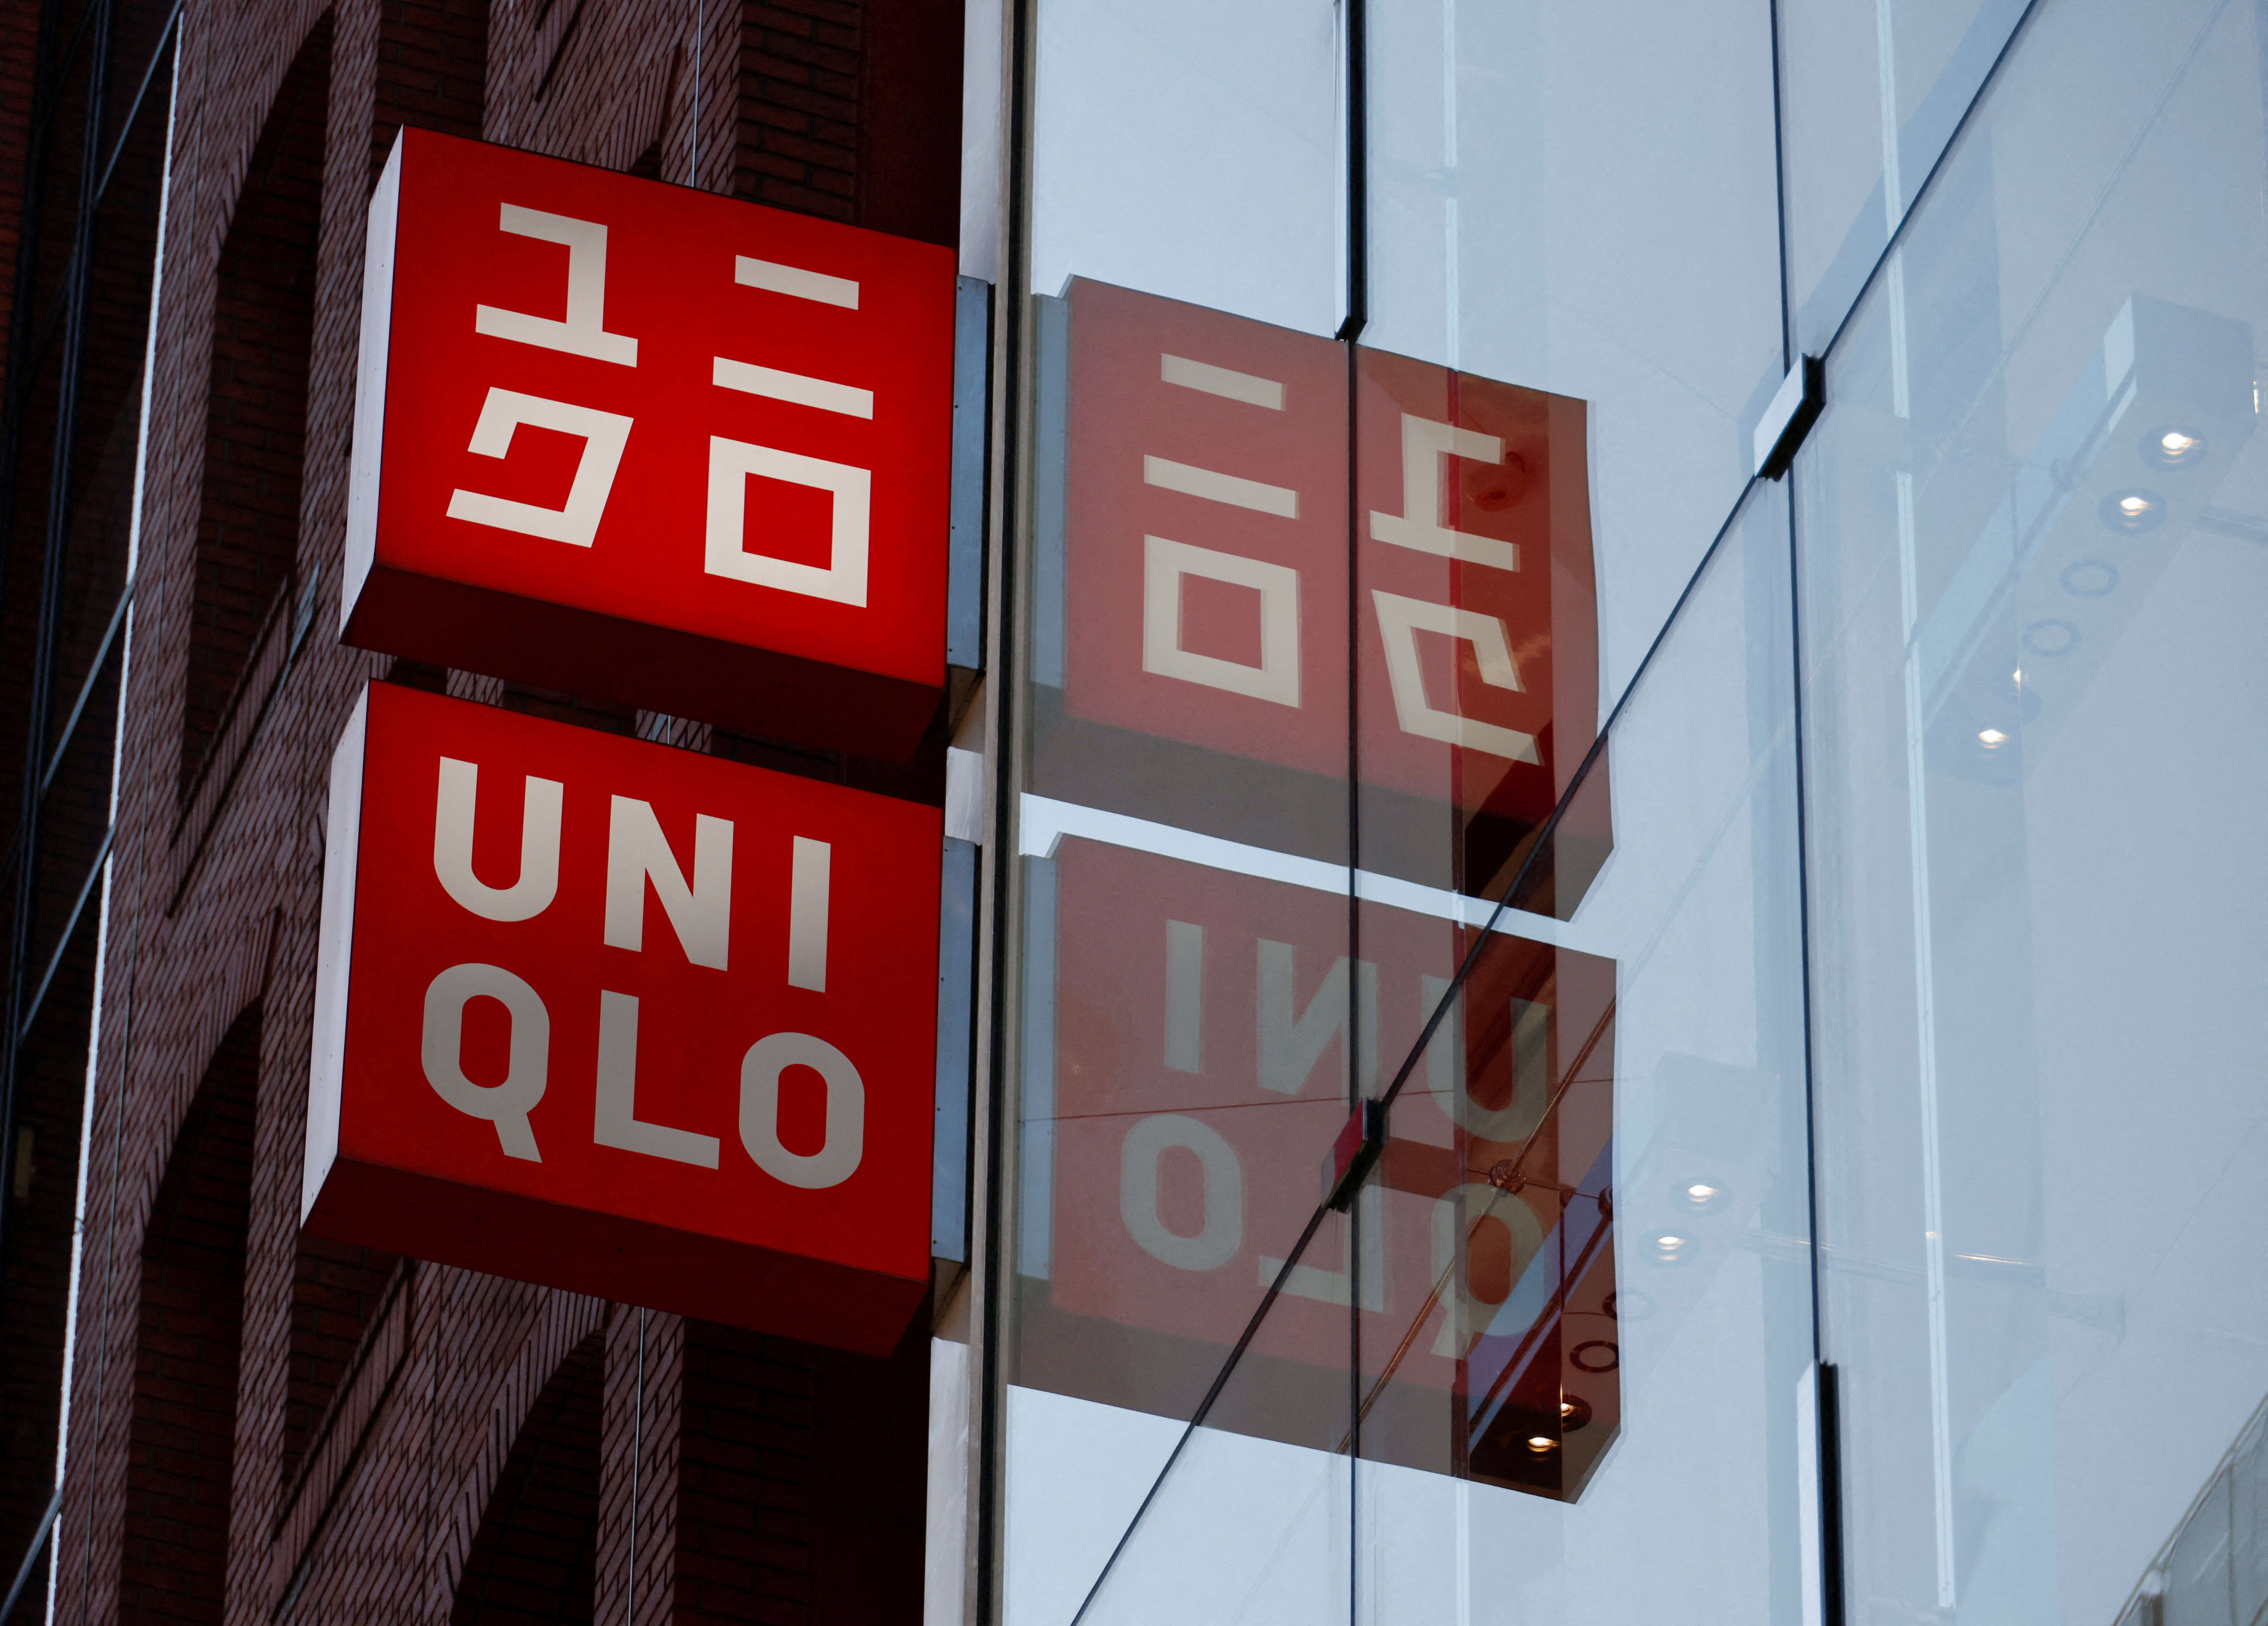 Uniqlo owner warns of big profit drop in China due to Covid19 curbs   Financial Times